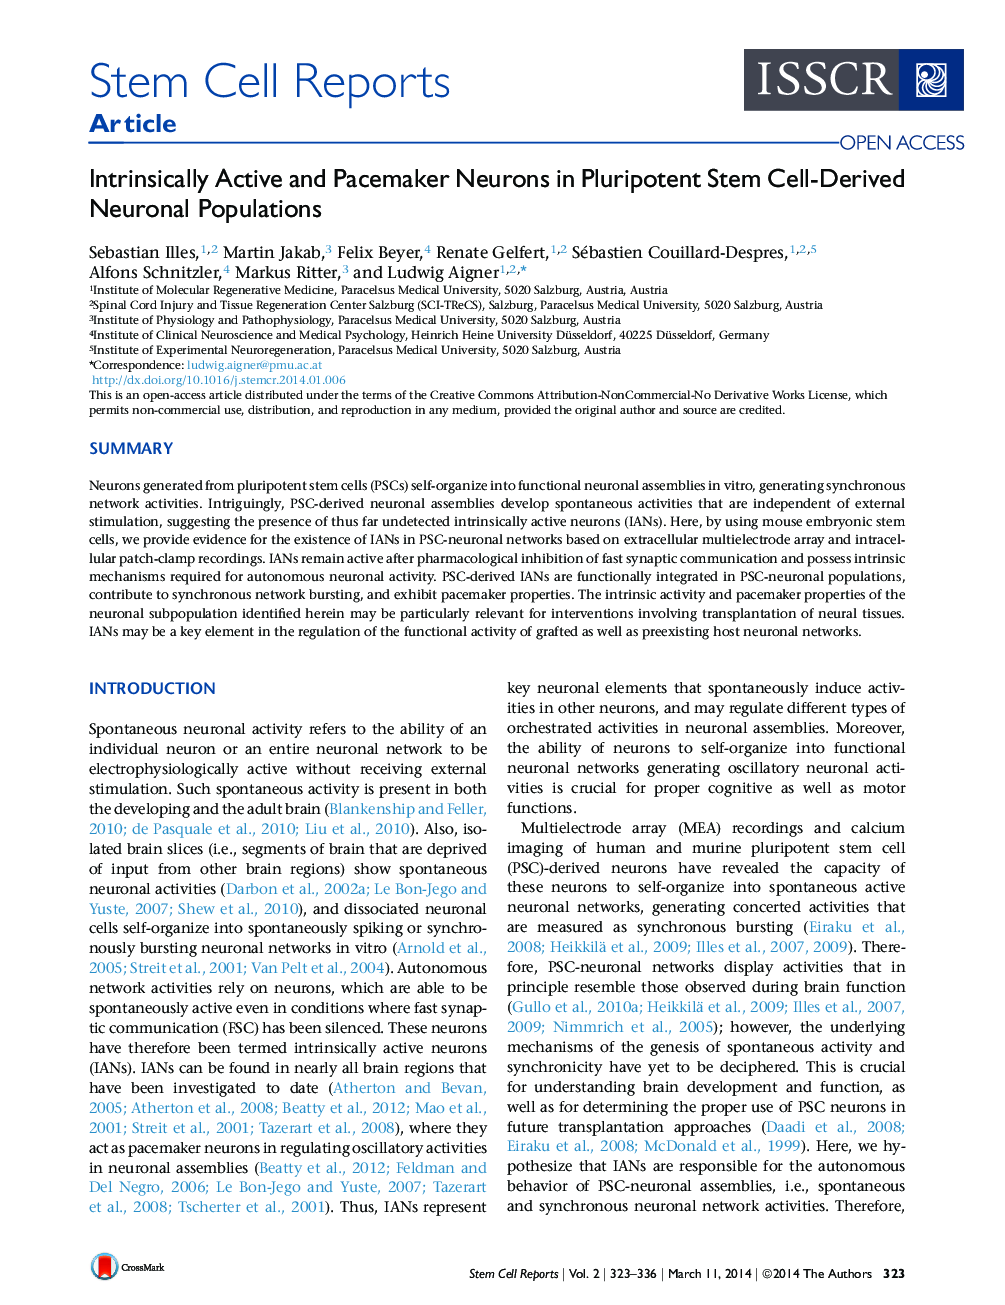 Intrinsically Active and Pacemaker Neurons in Pluripotent Stem Cell-Derived Neuronal Populations 